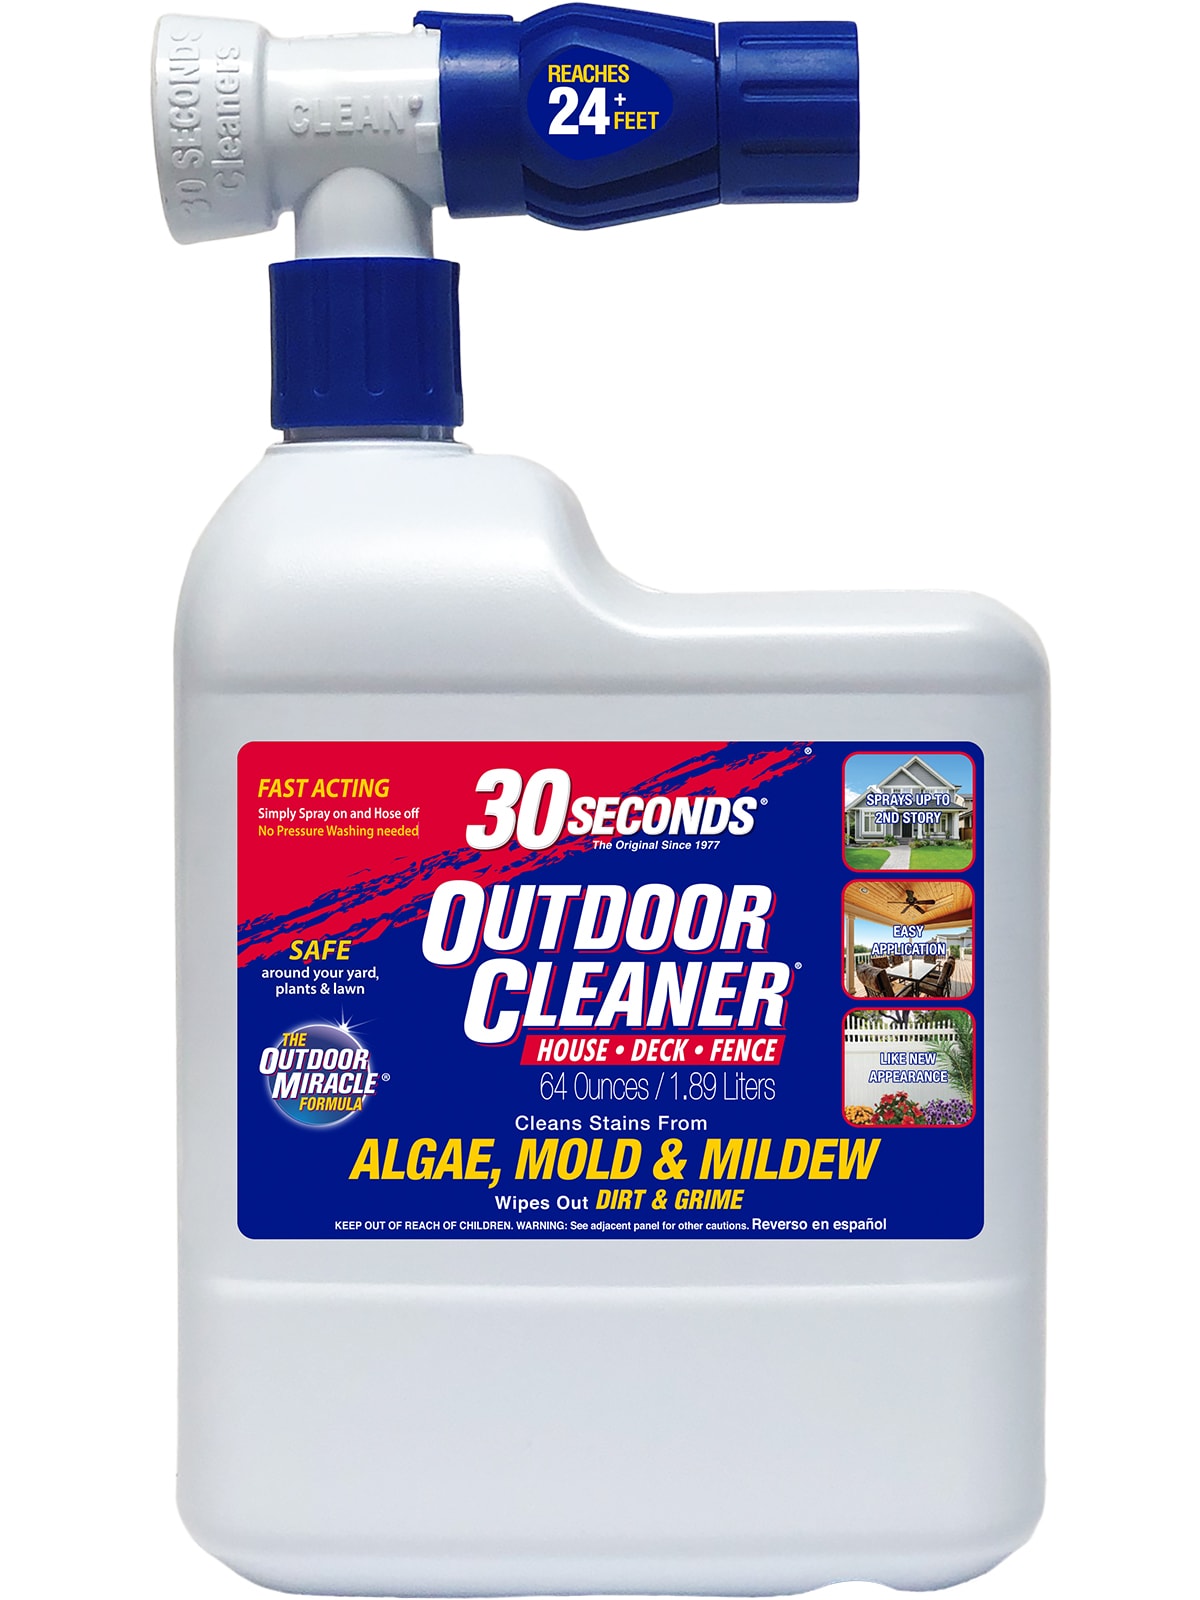 Miracle Brands 1.3 Gal. Outdoor Concentrate Cleaner 3904 - The Home Depot